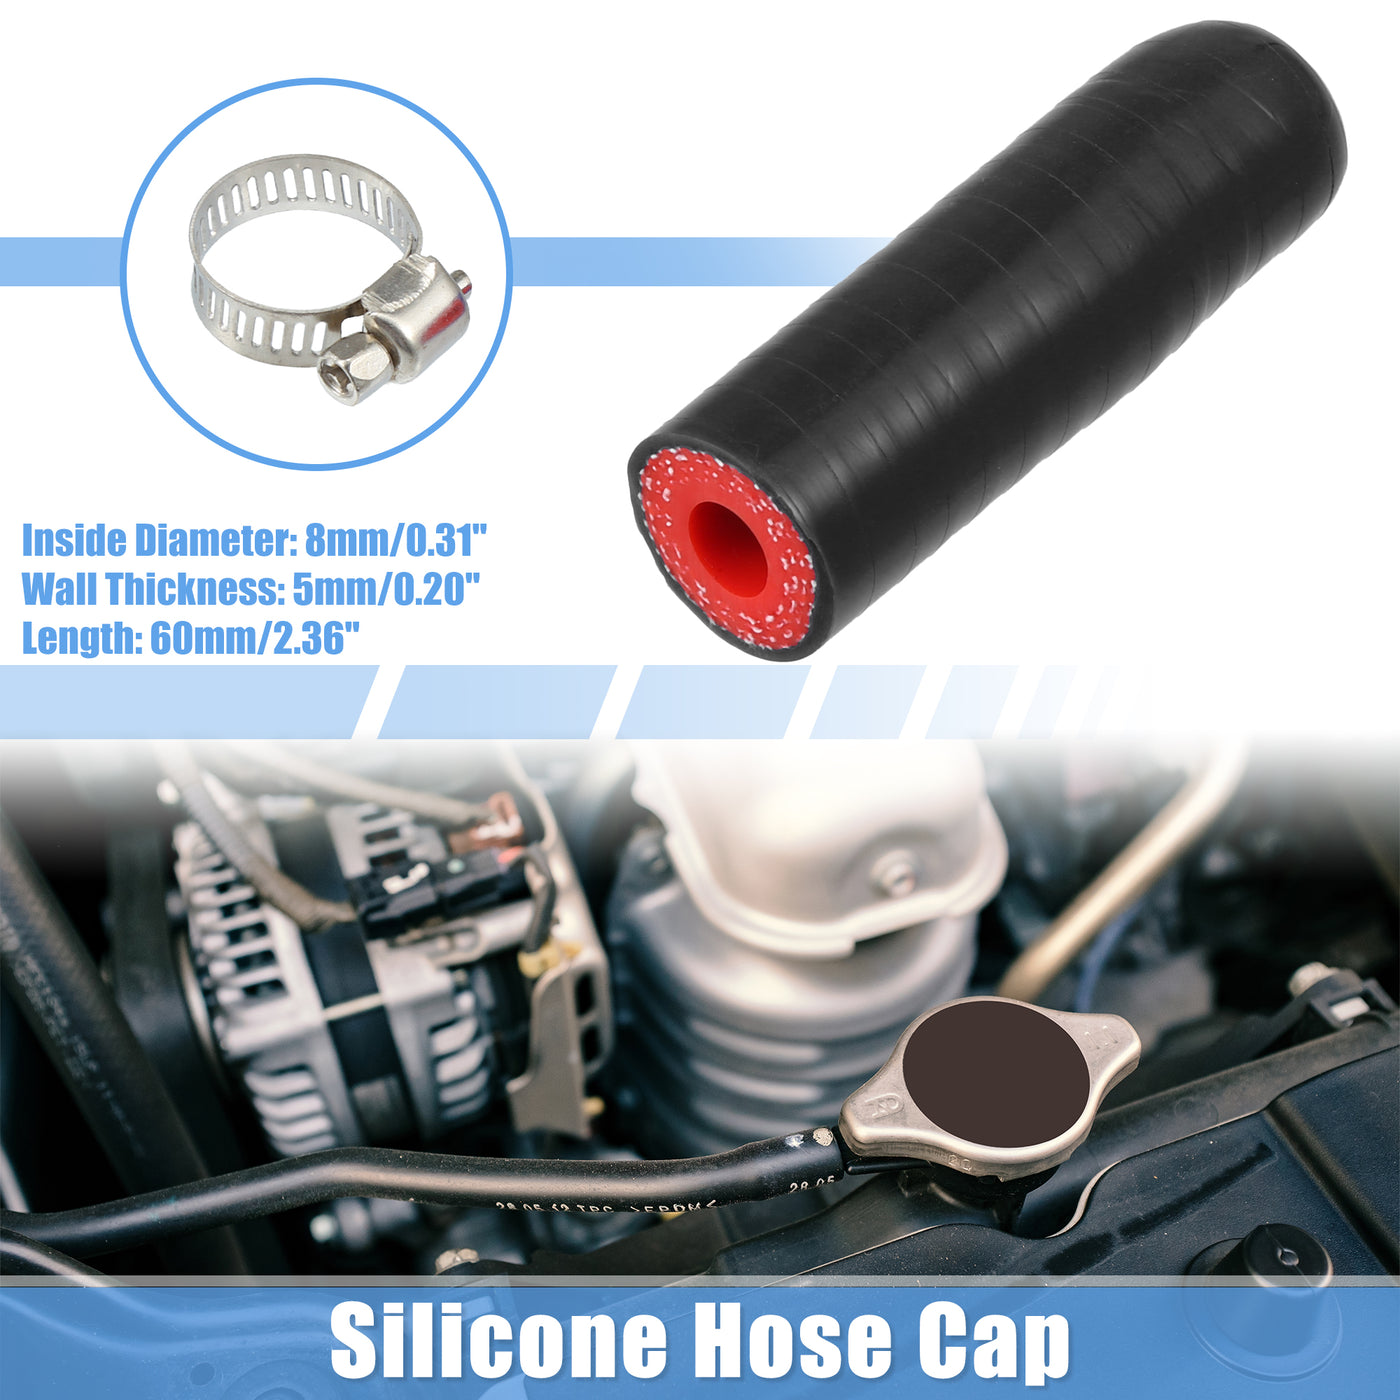 A ABSOPRO Universal Silicone Coolant Cap Intake Vacuum Hose End Plug 8mm 0.31" ID Car Coolant Heater Bypass Vacuum Water Port Silicone Black